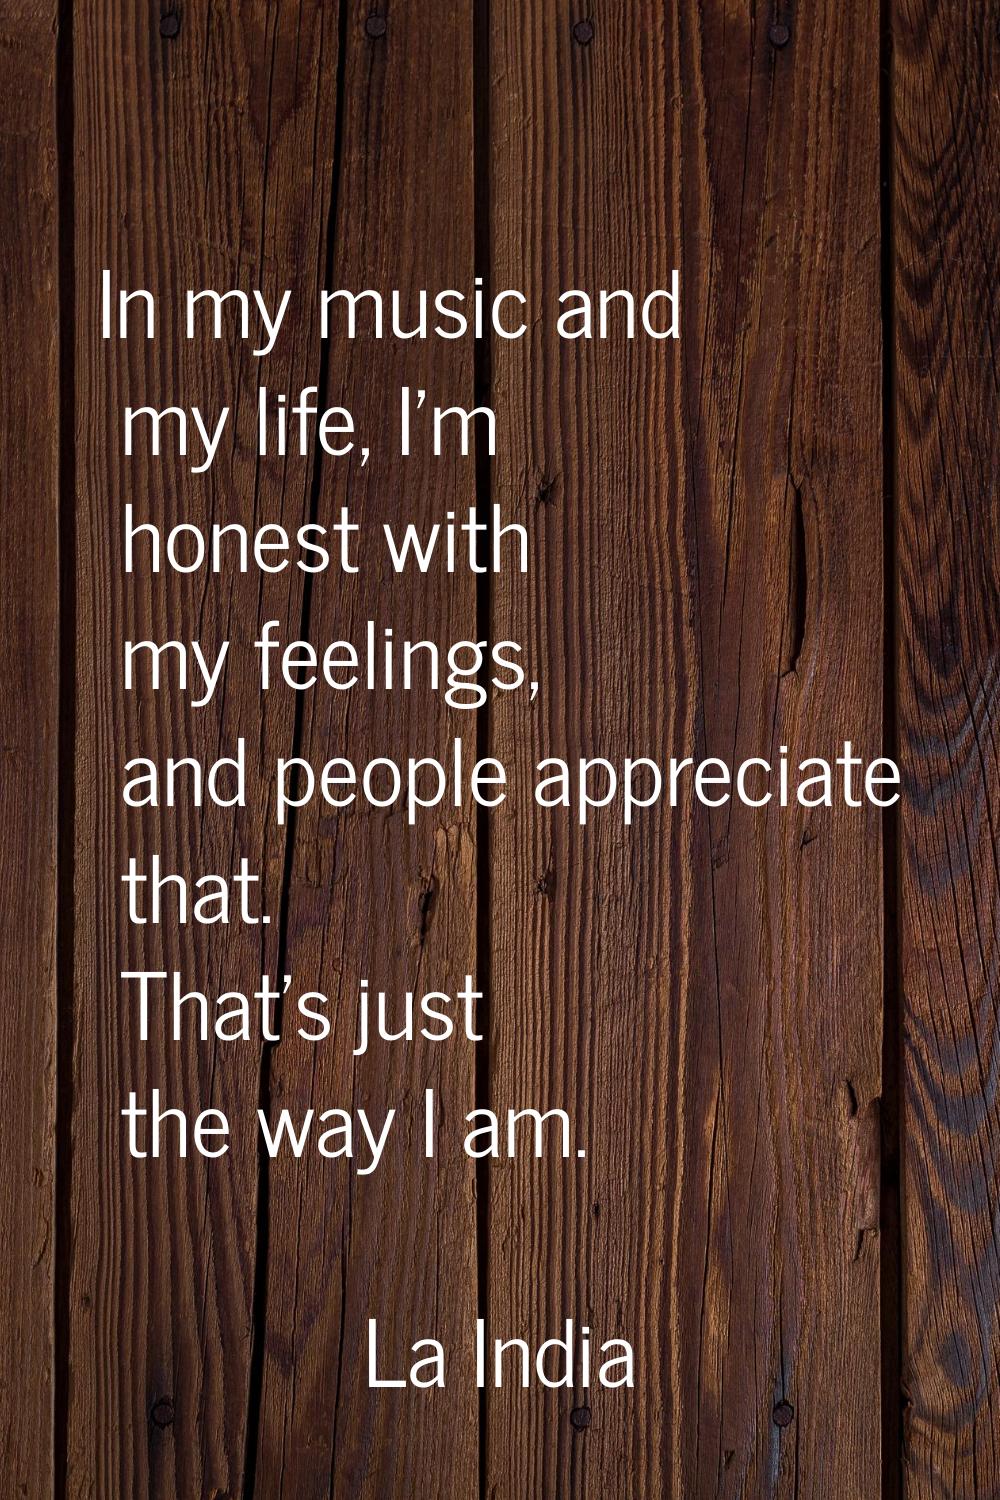 In my music and my life, I'm honest with my feelings, and people appreciate that. That's just the w